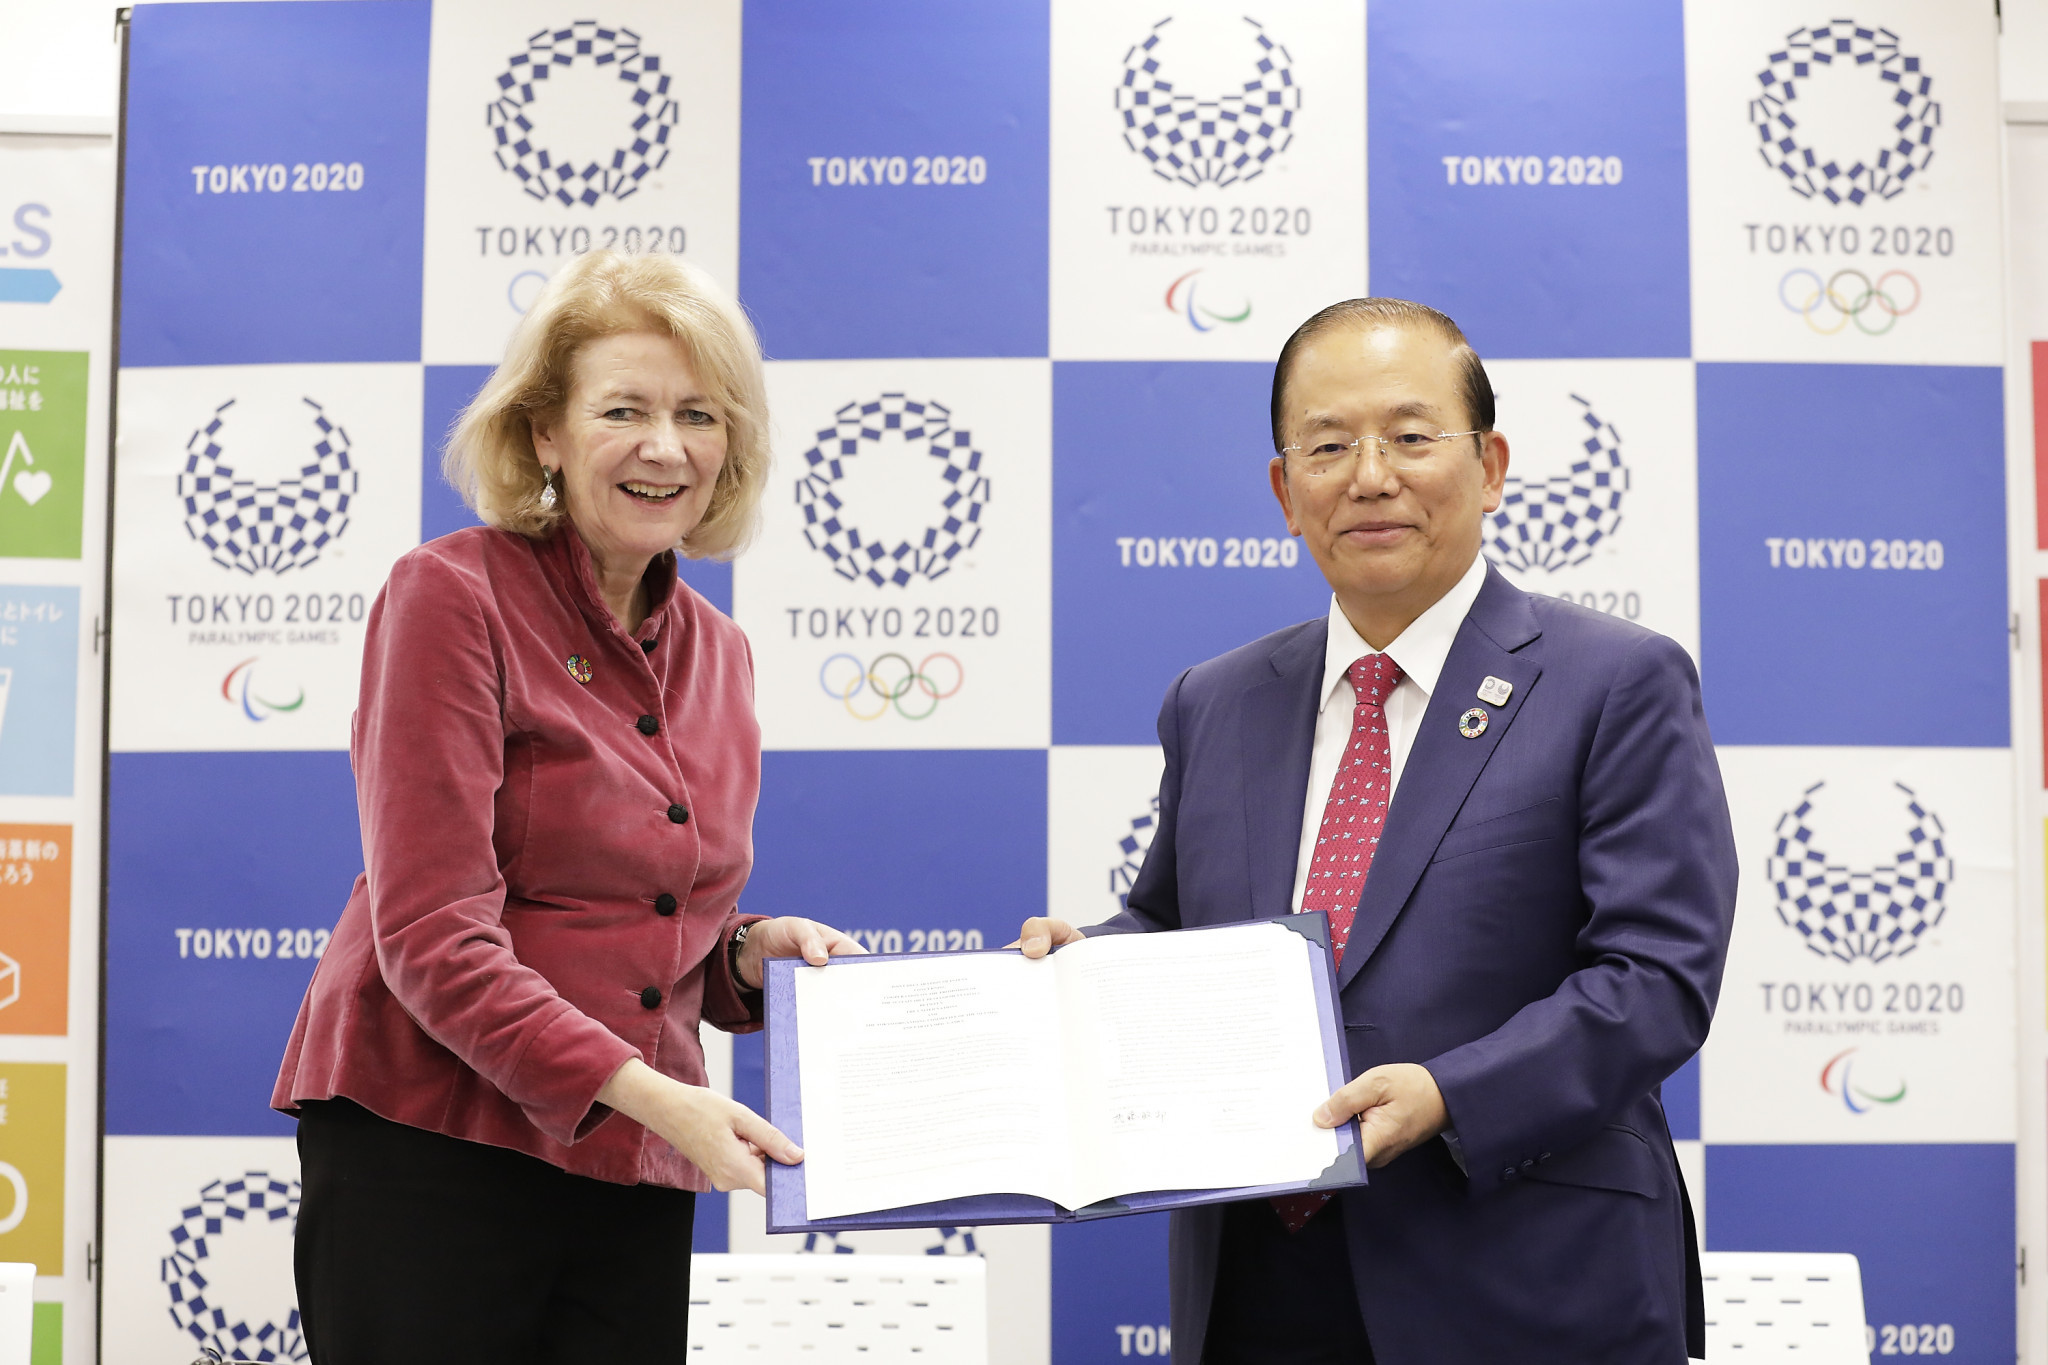 Alison Smale, the UN under-secretary general for global communications, and Toshiro Muto, chief executive of Tokyo 2020, have signed a letter of intent aimed at promoting the contribution of sport to sustainable development ©Tokyo 2020